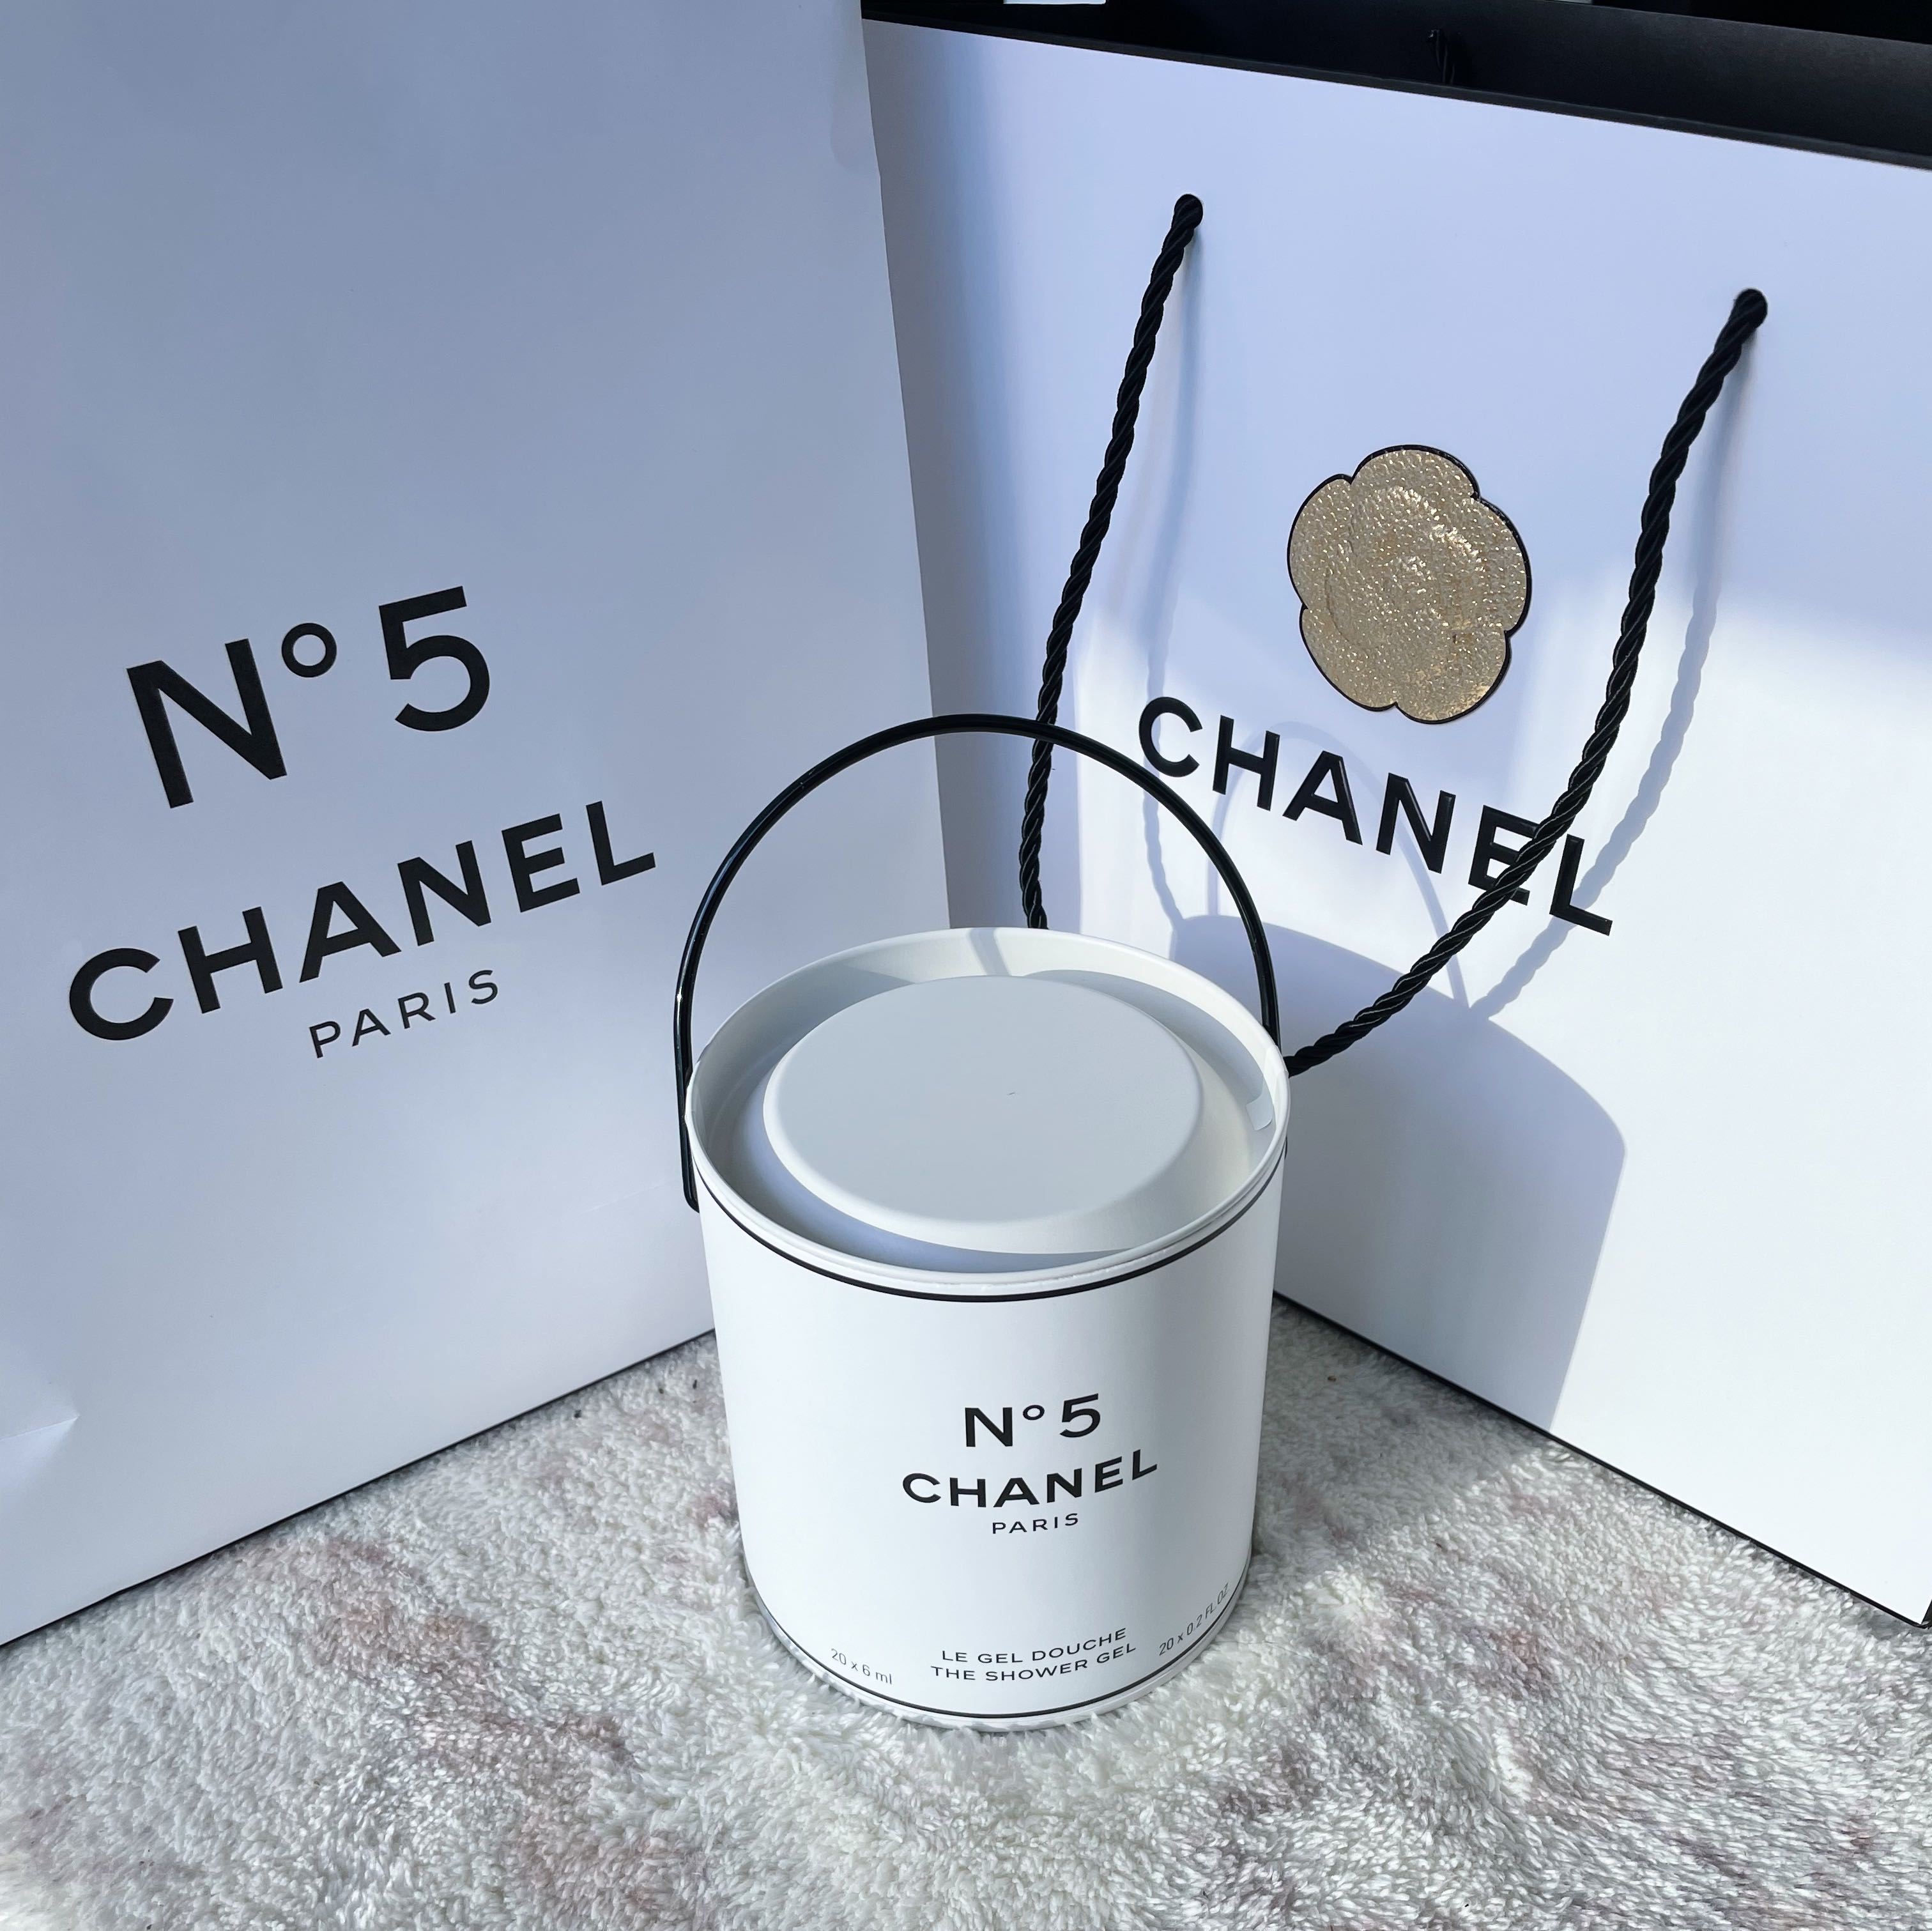 Chanel 5 Factory Collection №5 The Shower Gel Limited Edition 20x0.2 Oz